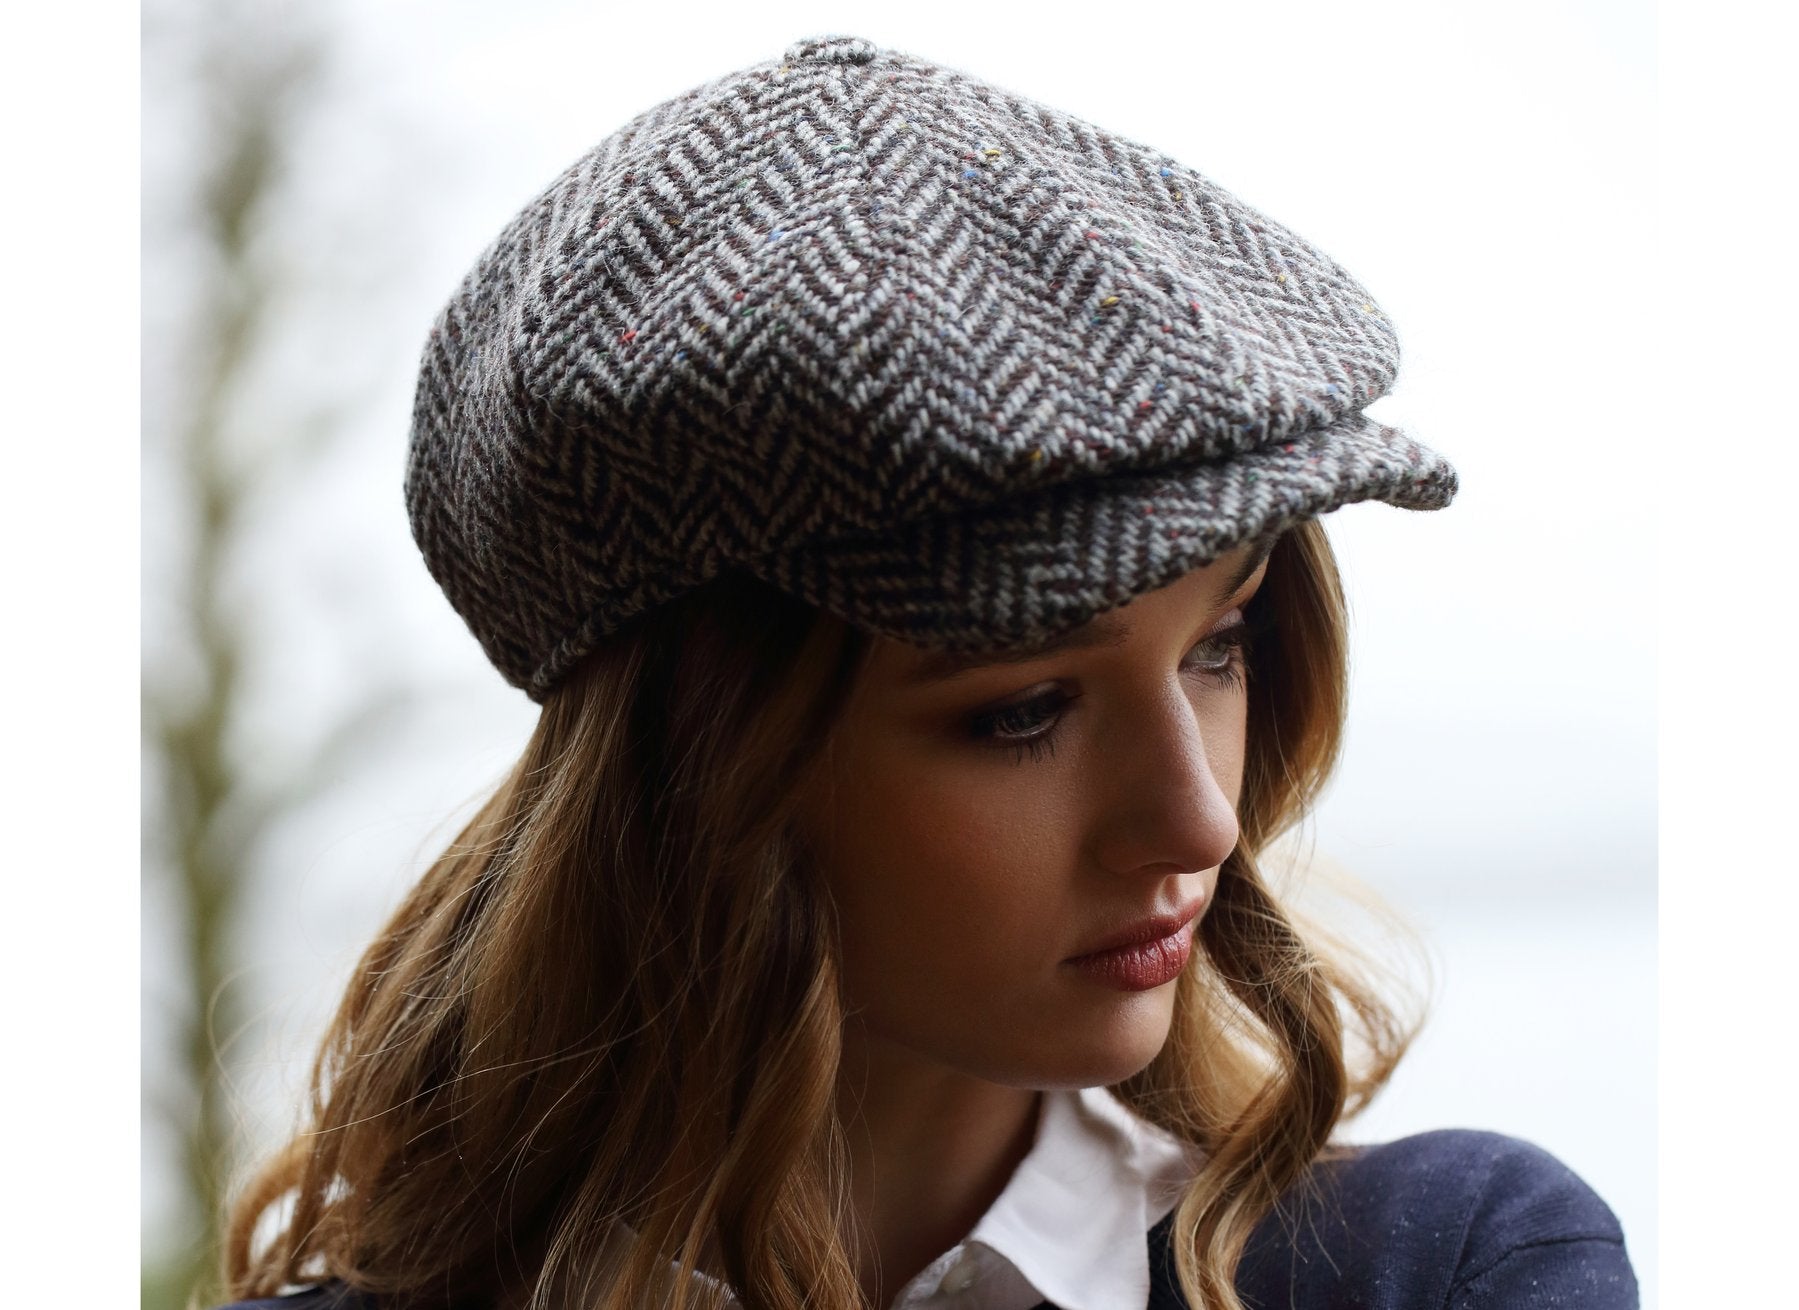 woman wearing a Black and Grey wide Herringbone Donegal Tweed Peaky Blinders Style Cap by Hanna Hats of Donegal.